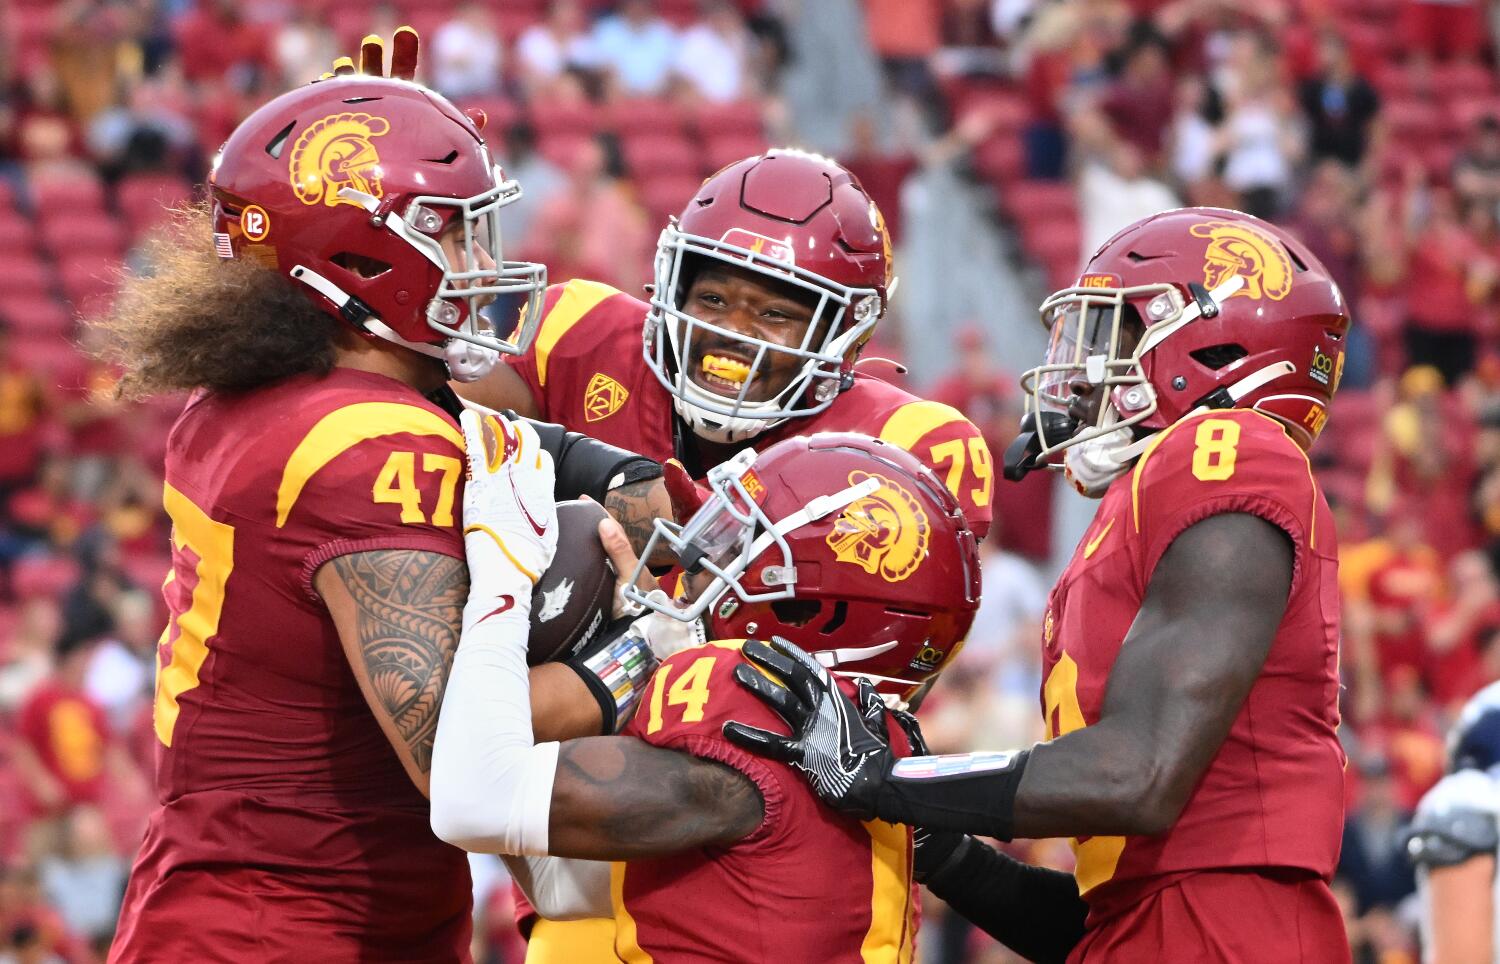 Four takeaways from USC's win over Nevada: Trojans' defense steps up despite injuries